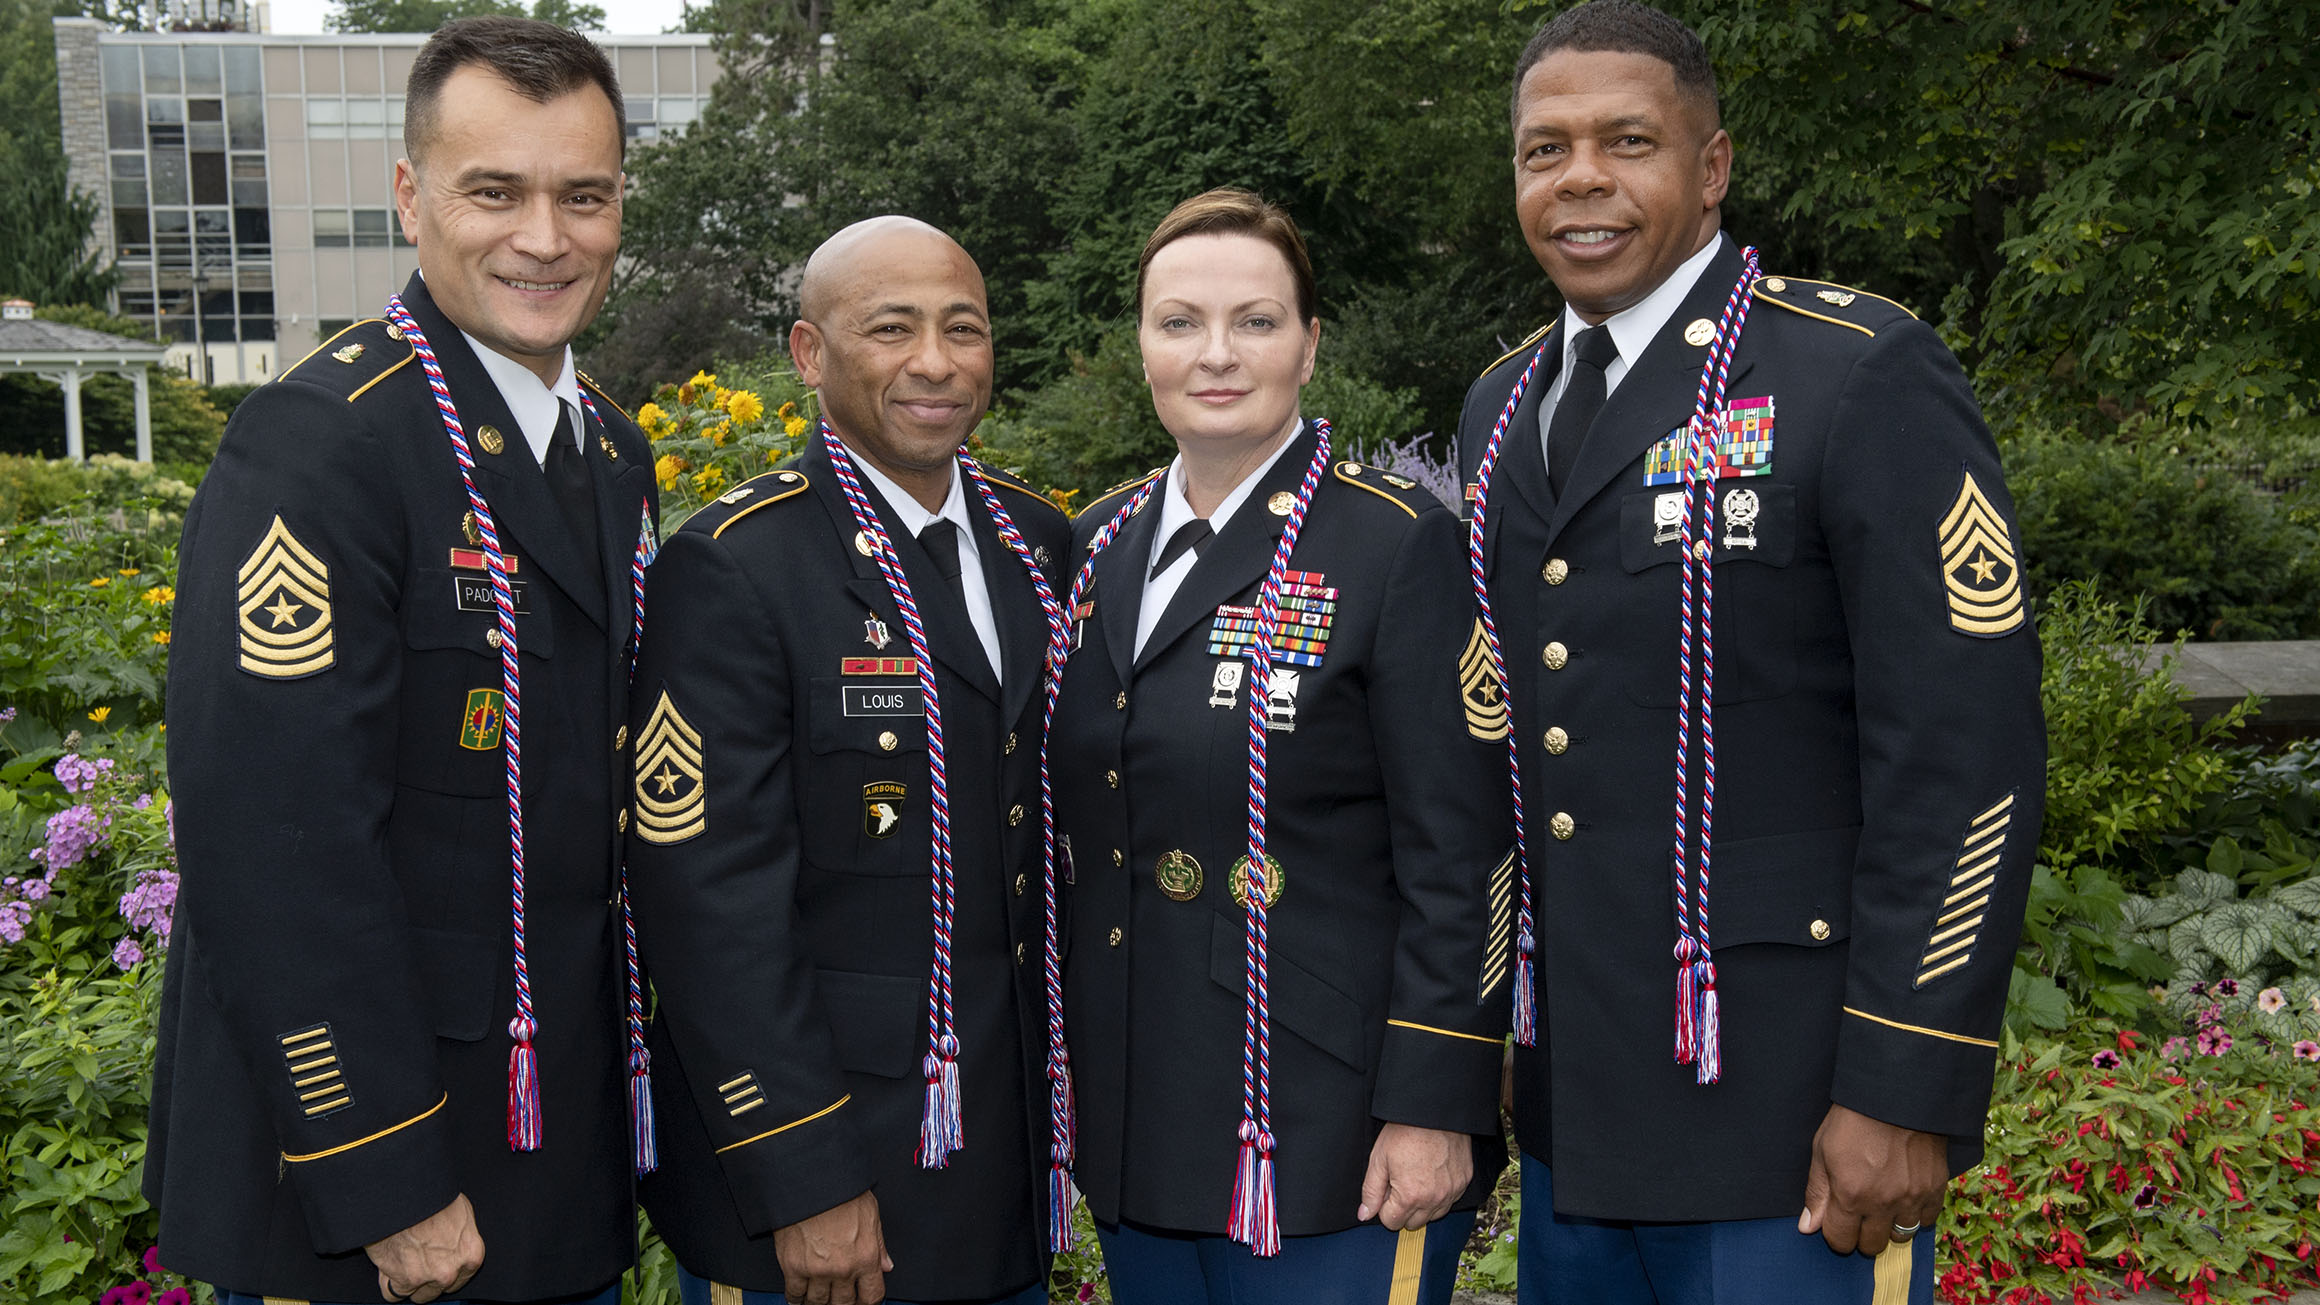 Four soldiers stand in their uniforms with military honor cords around their necks